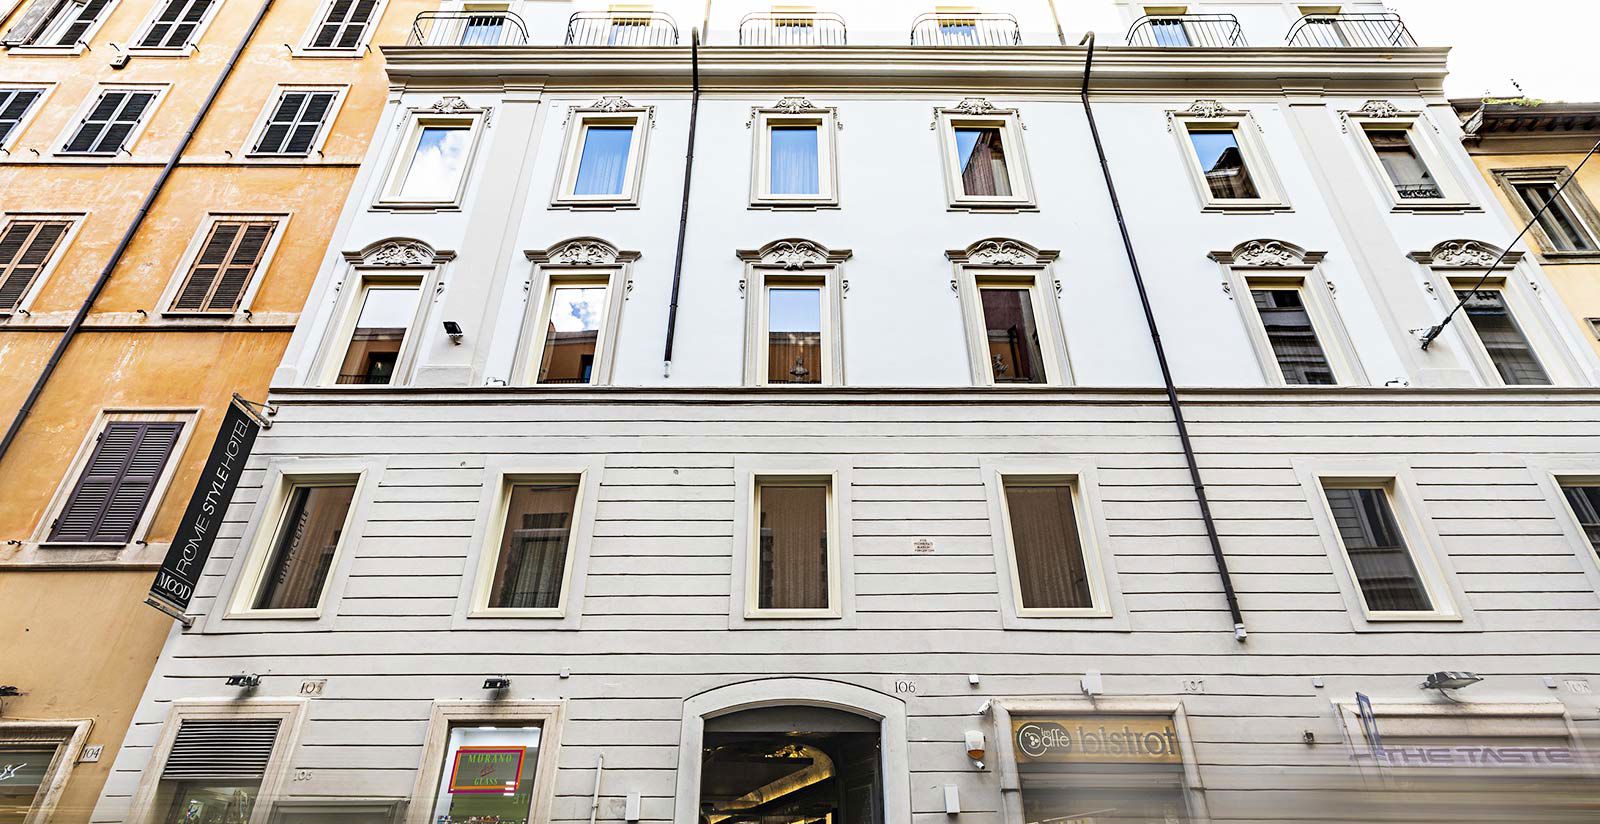 Your budget hotel in downtown Rome